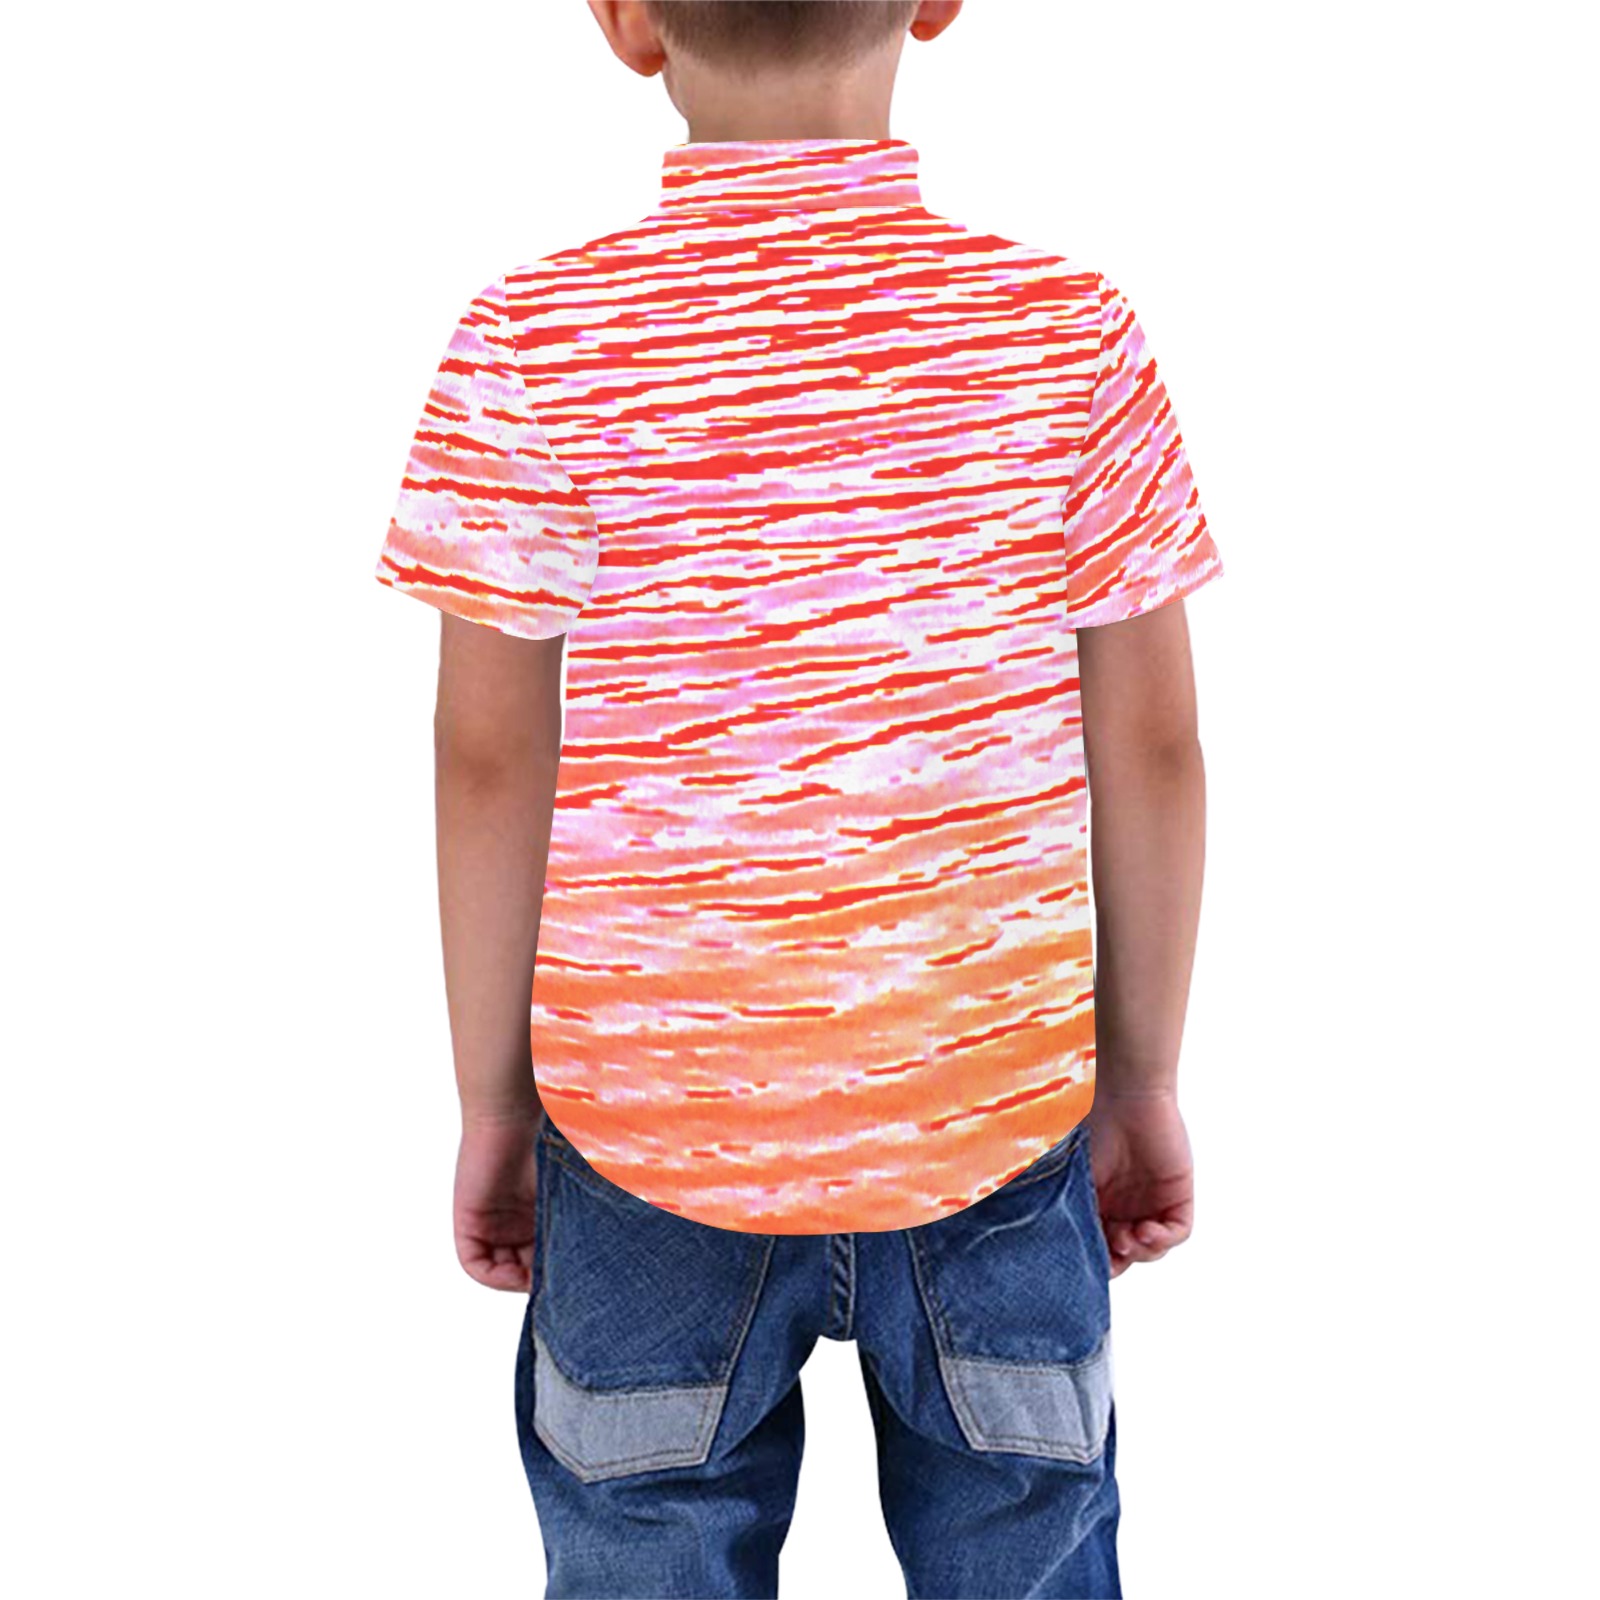 Orange and red water Boys' All Over Print Short Sleeve Shirt (Model T59)